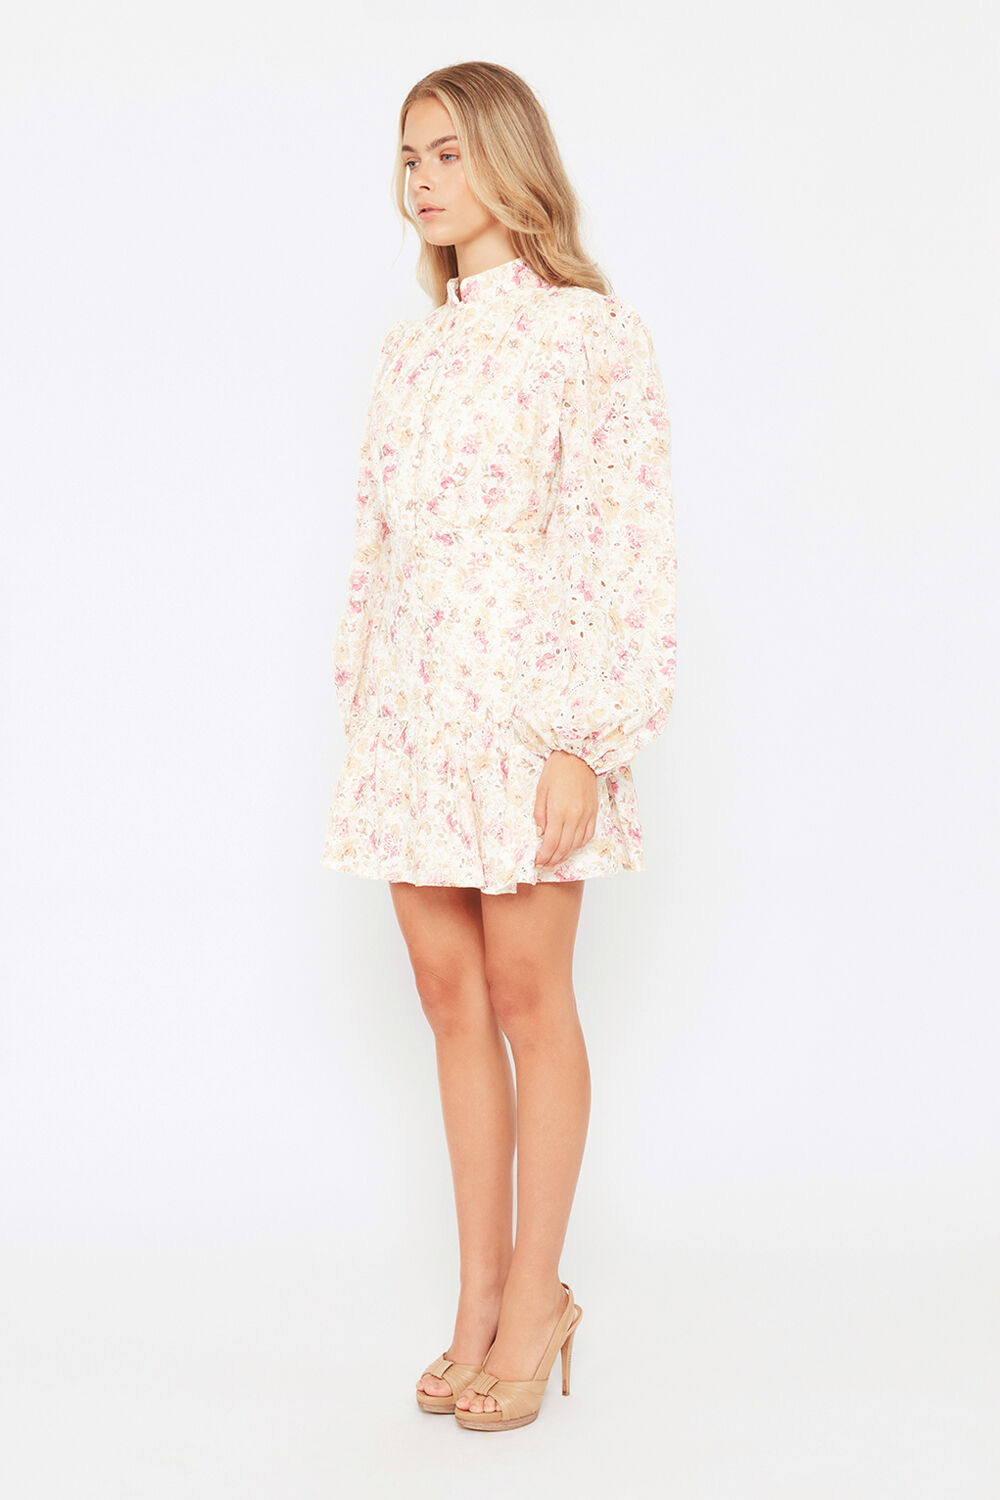 HENDRY FLORAL MINI DRESS in colour ROSE TAN